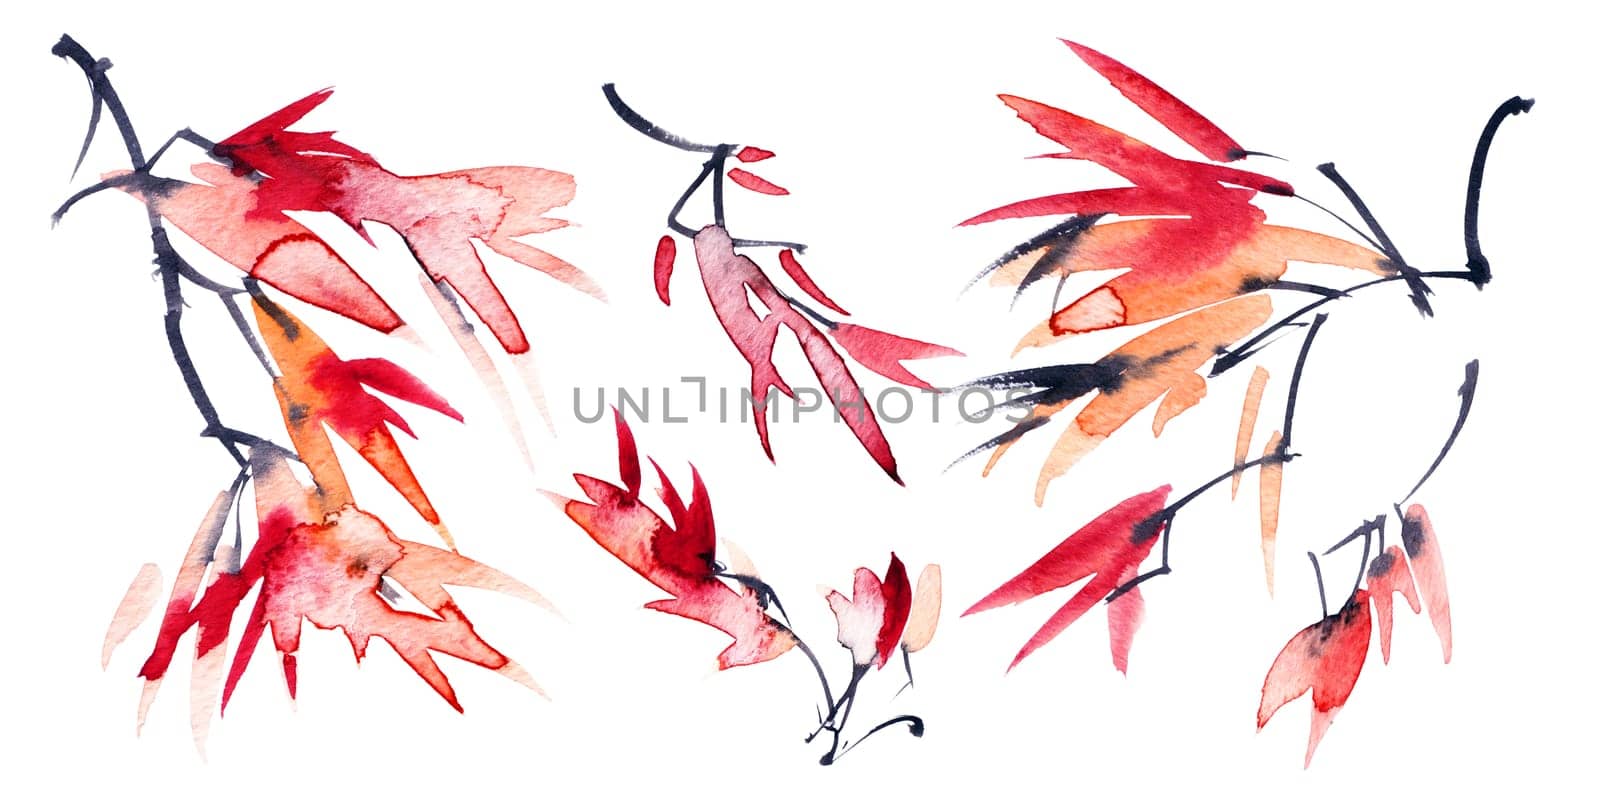 Autumn tree branch with orange and red leaves - set of 5 branches on white background. Hand drawn artistic painting in sumi-e style, japanese painting, chinese painting.